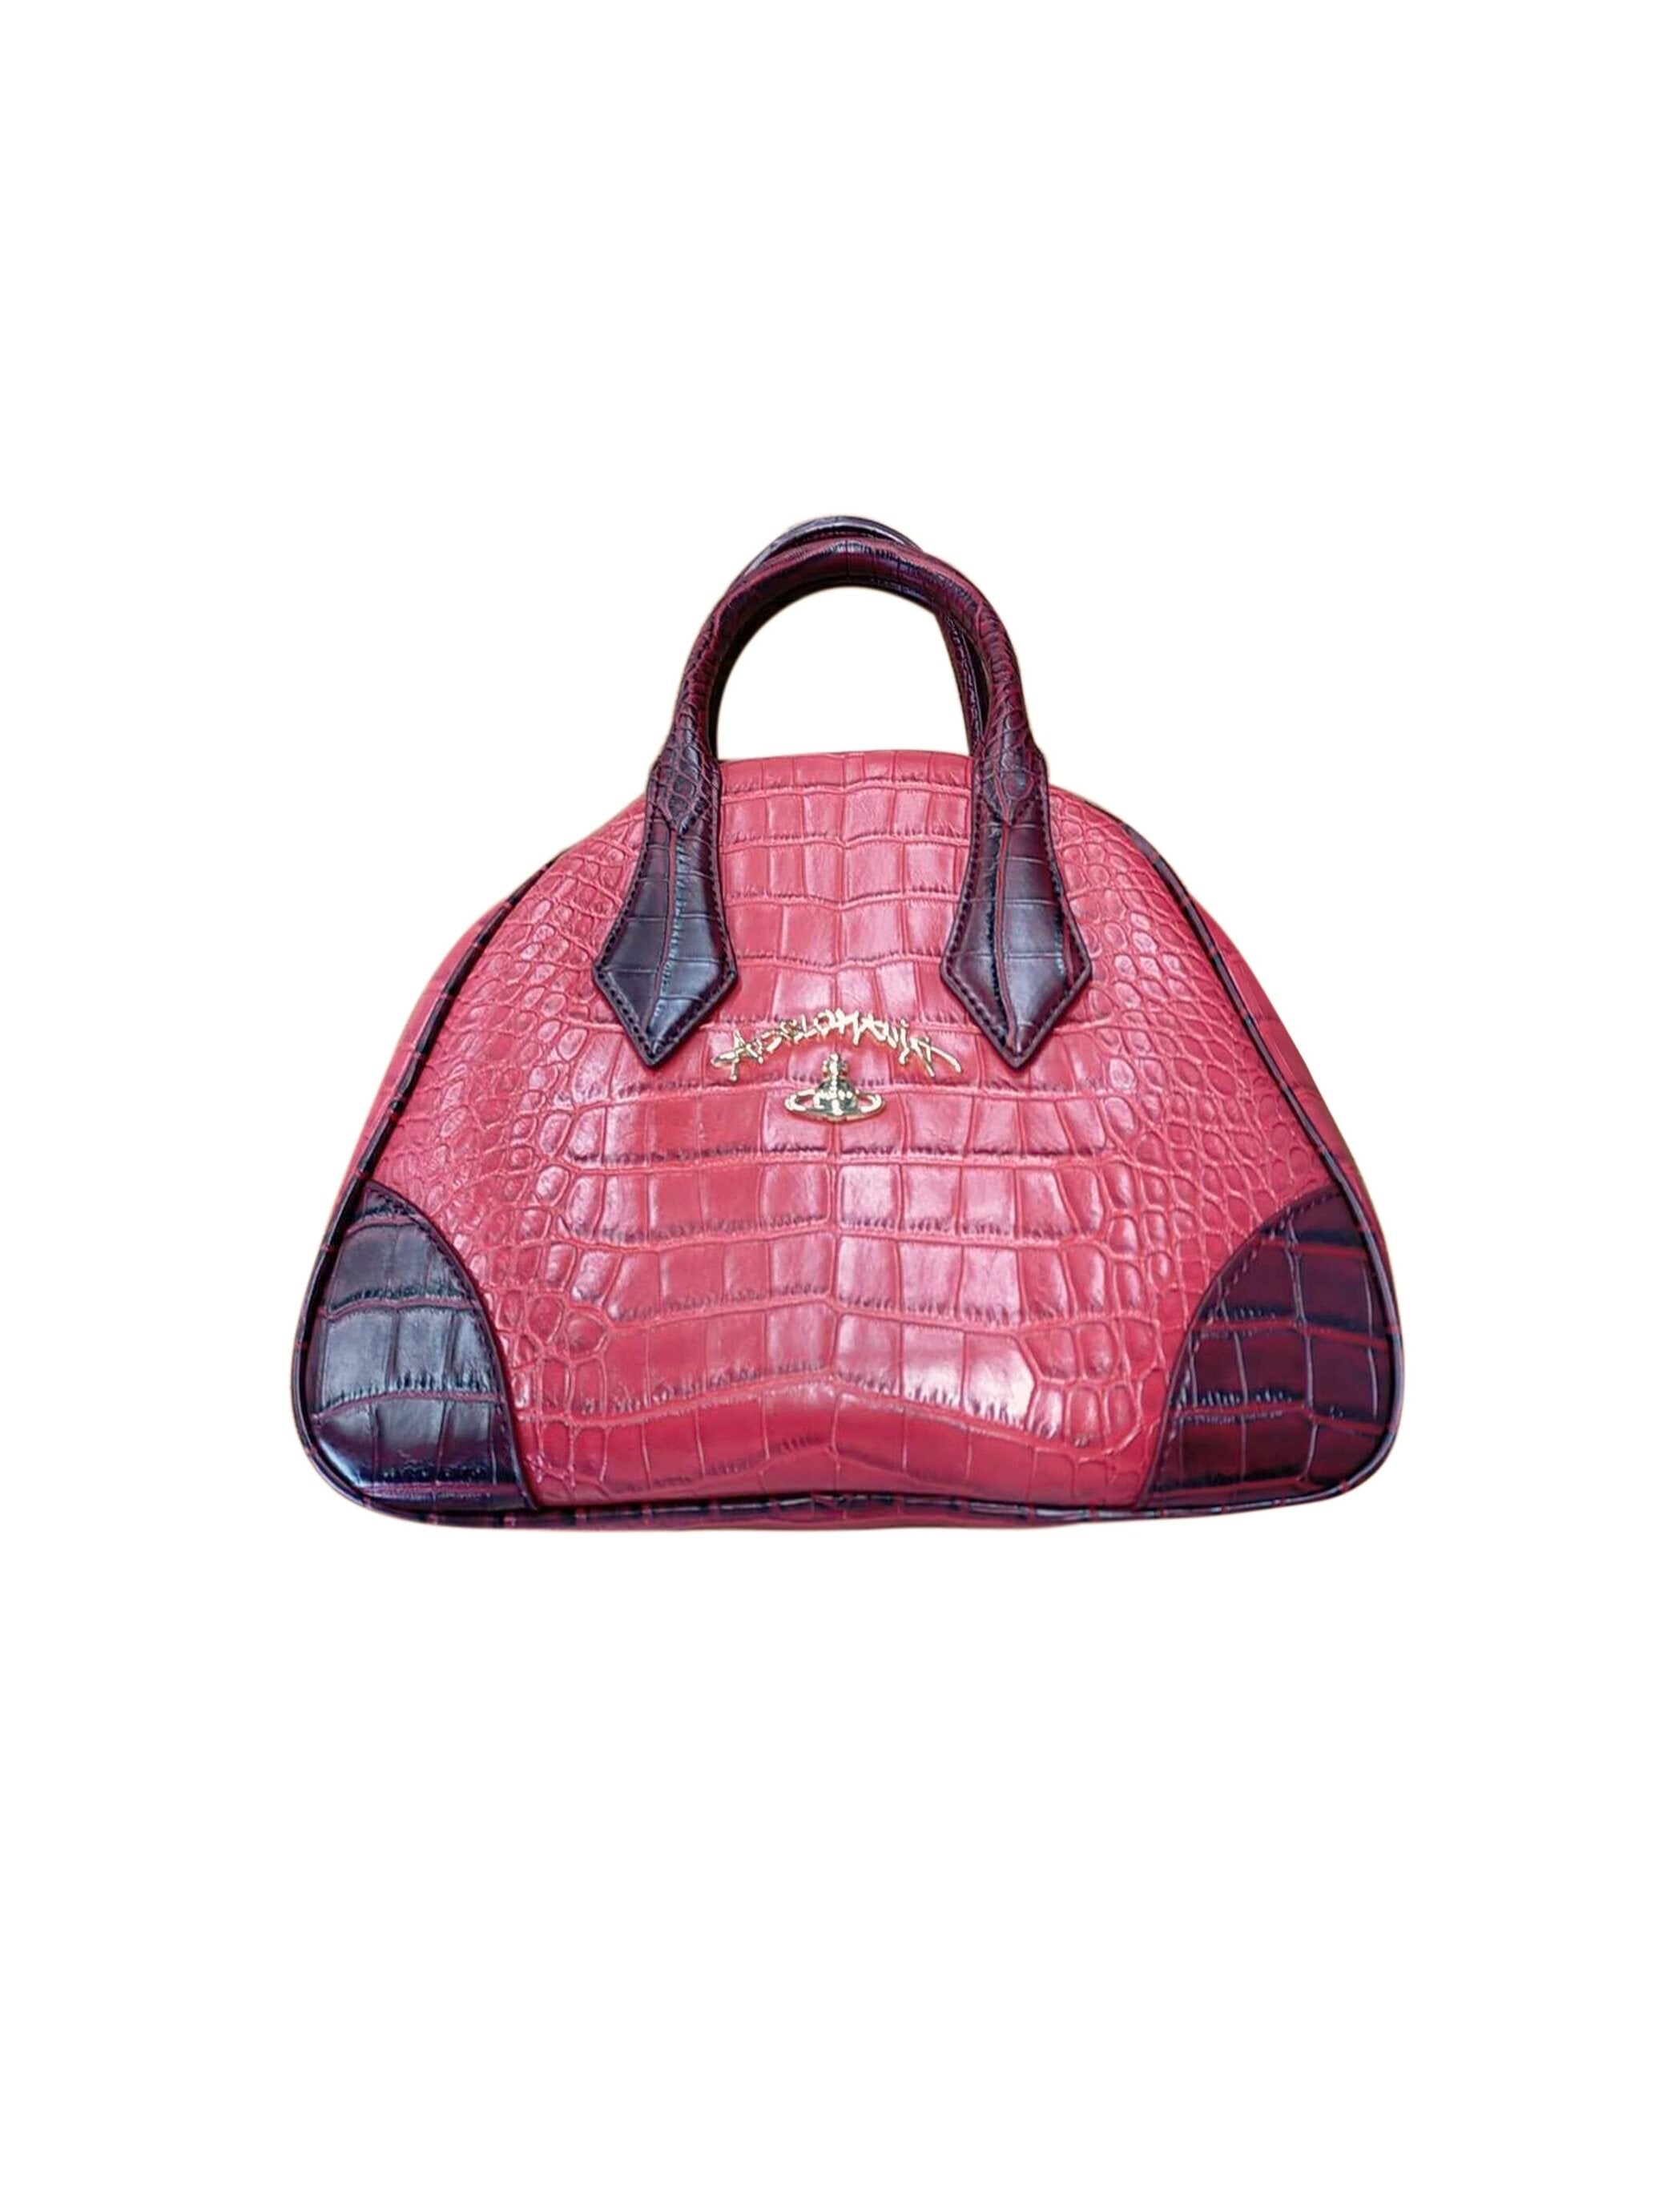 Vivienne Westwood 2000s Red Rounded Bag